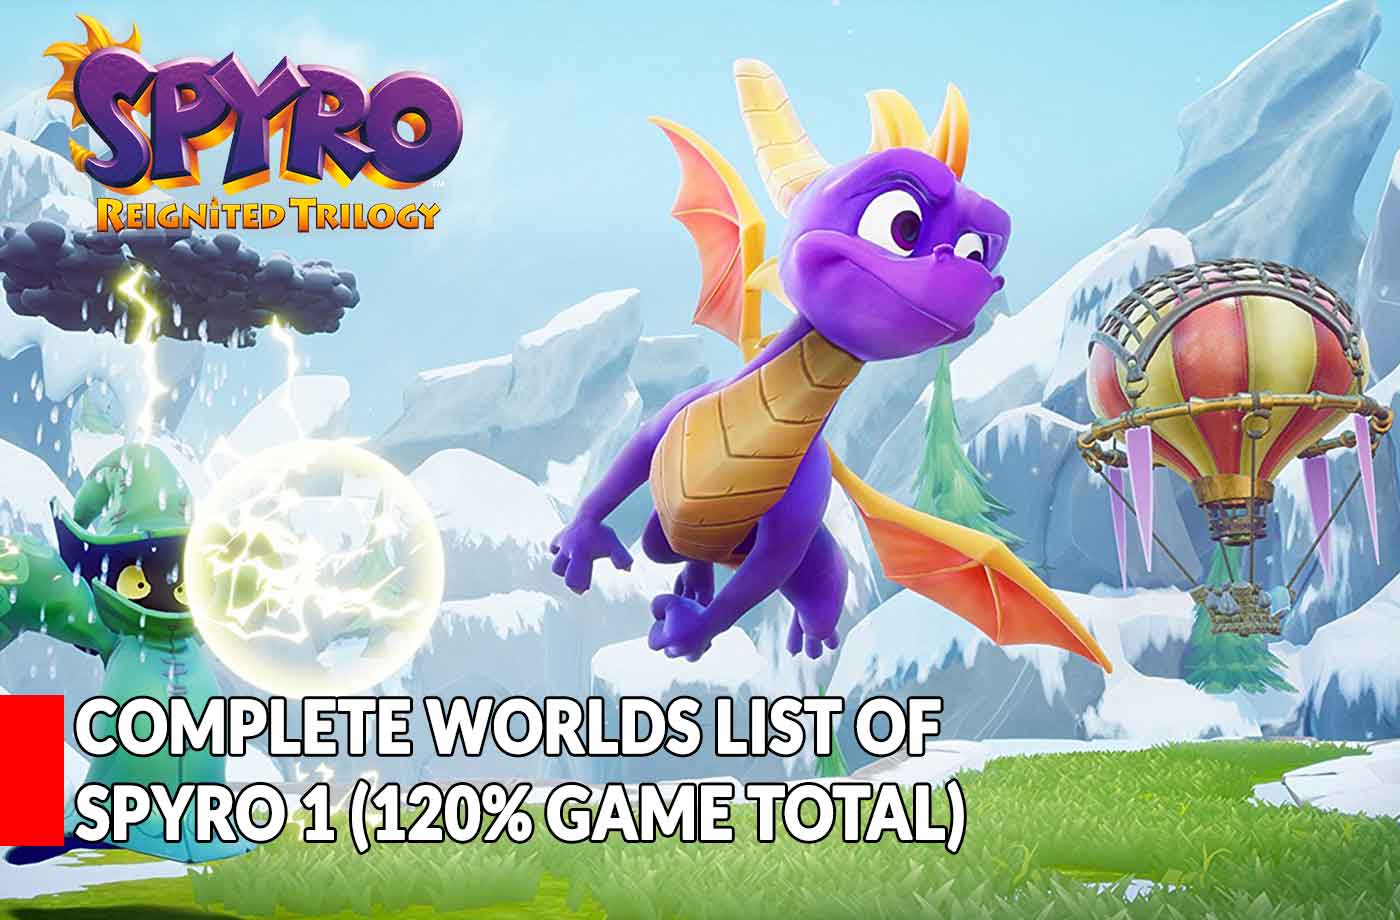 Guide Spyro Trilogy all worlds list of 1 (How to Unlock The World) Kill The Game